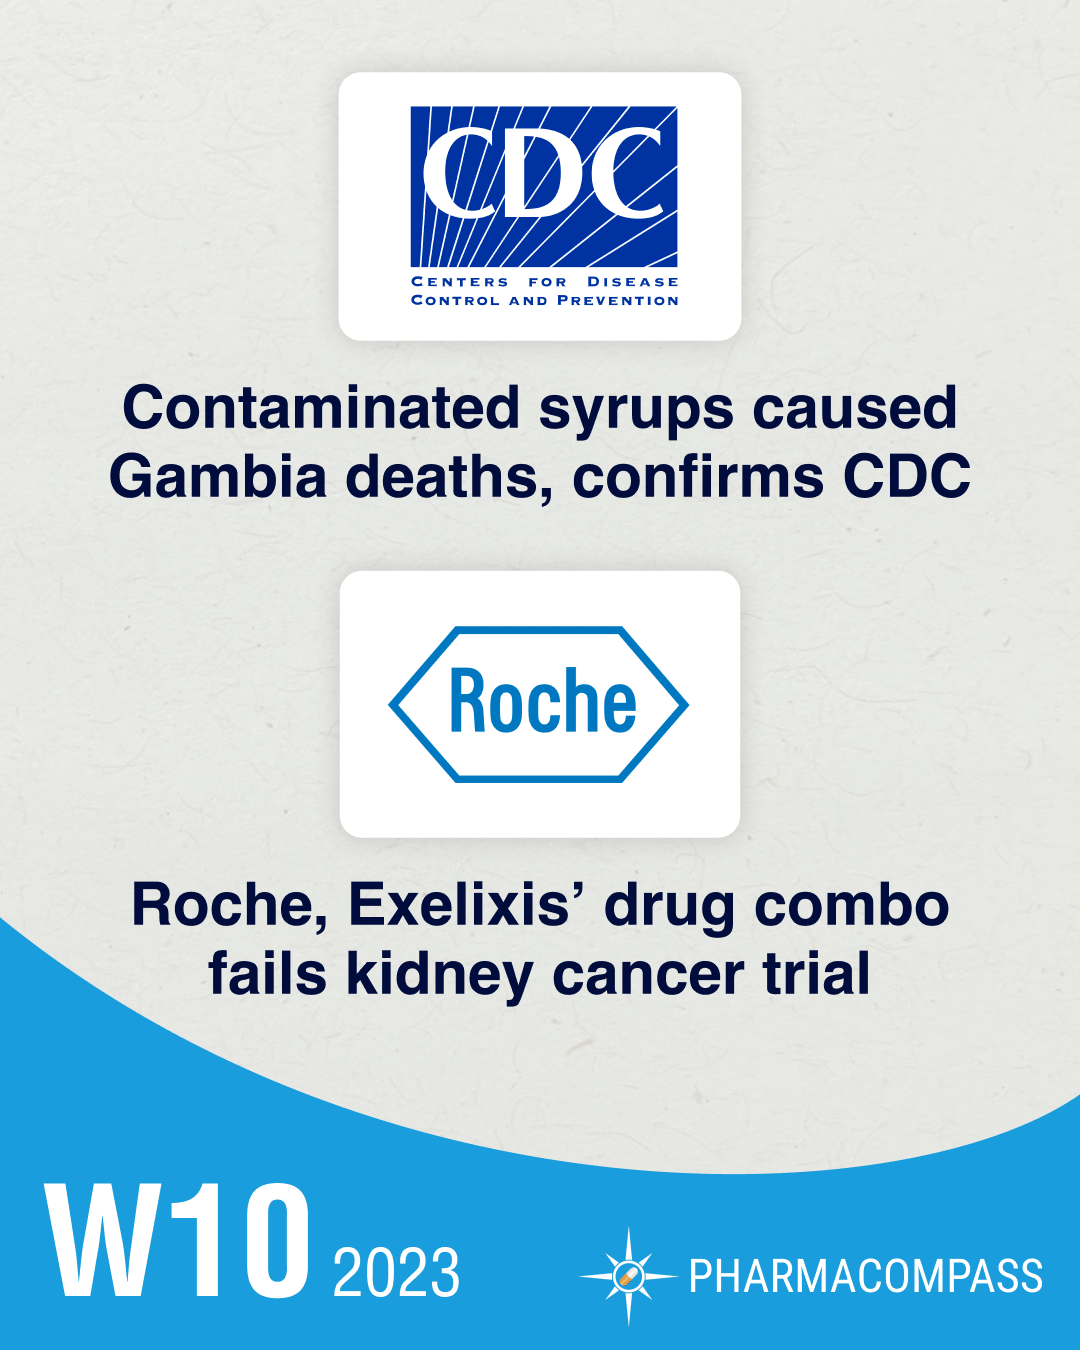 Contaminated syrups caused deaths, confirms CDC; Roche, Exelixis’ drug combo fails kidney cancer trial